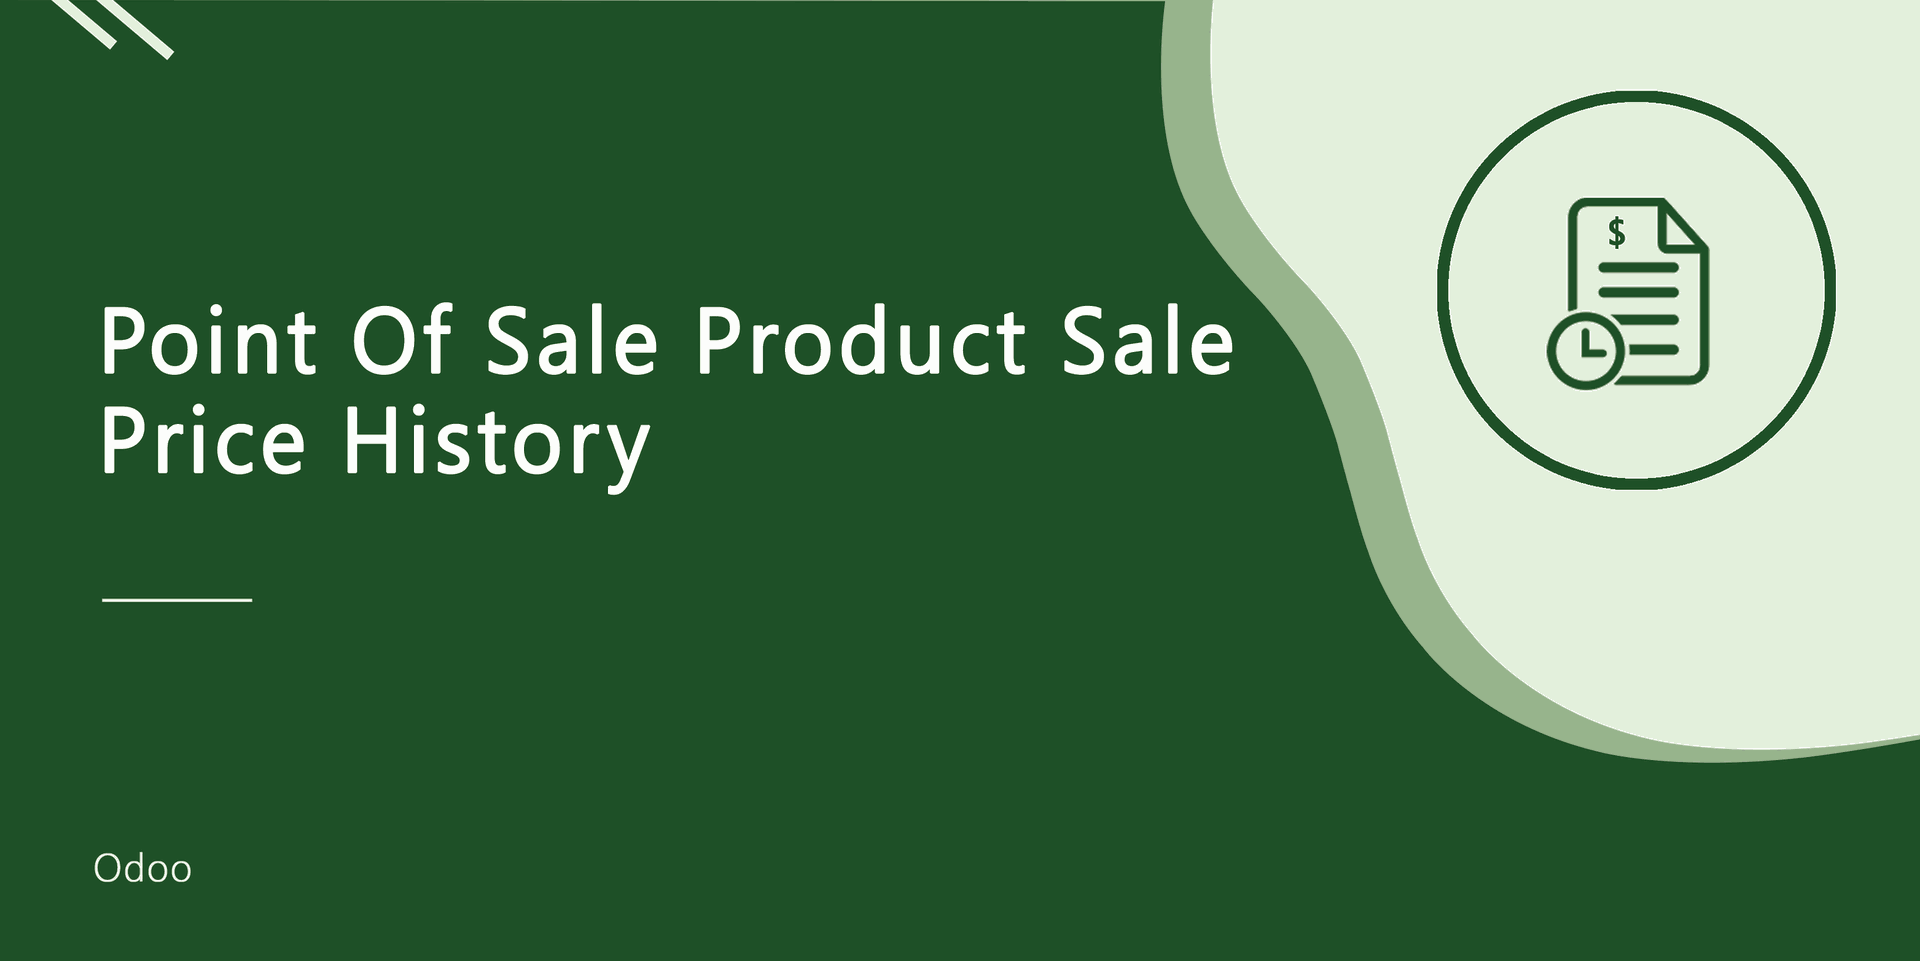 Point Of Sale Product Sale Price History